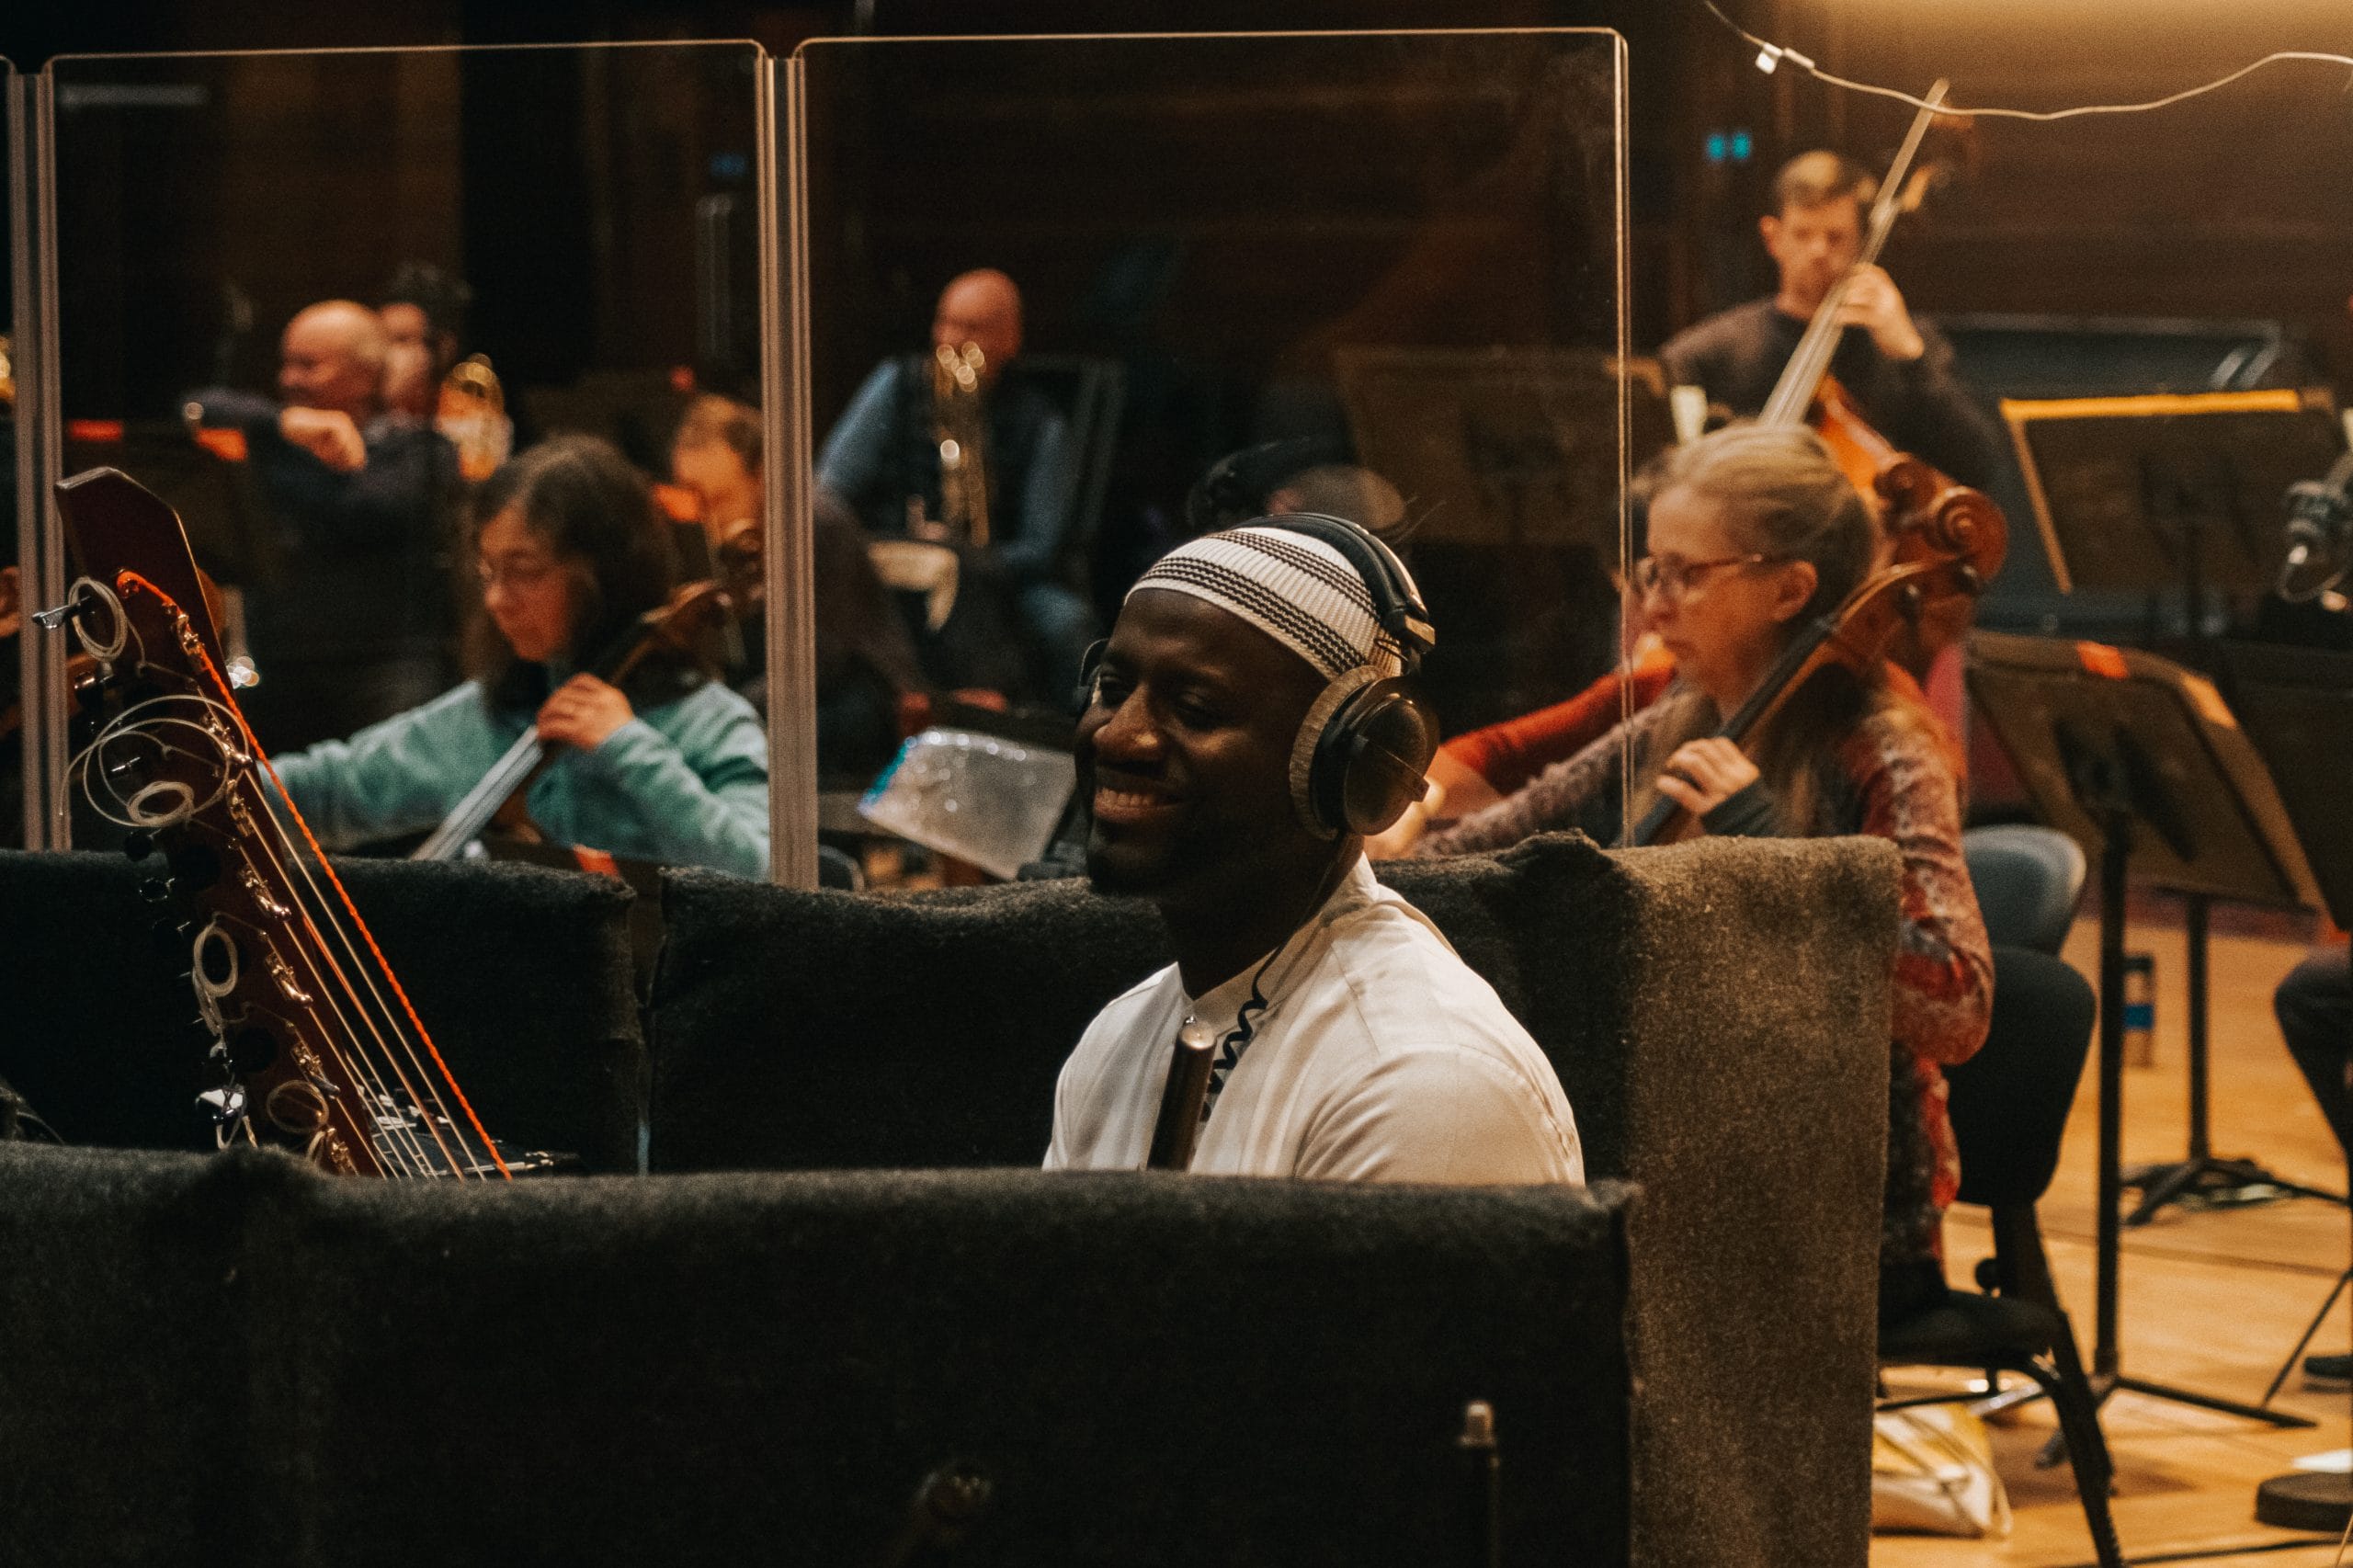 Sekou Keita, a musician, sits surrounded by an orchestra with headphones on